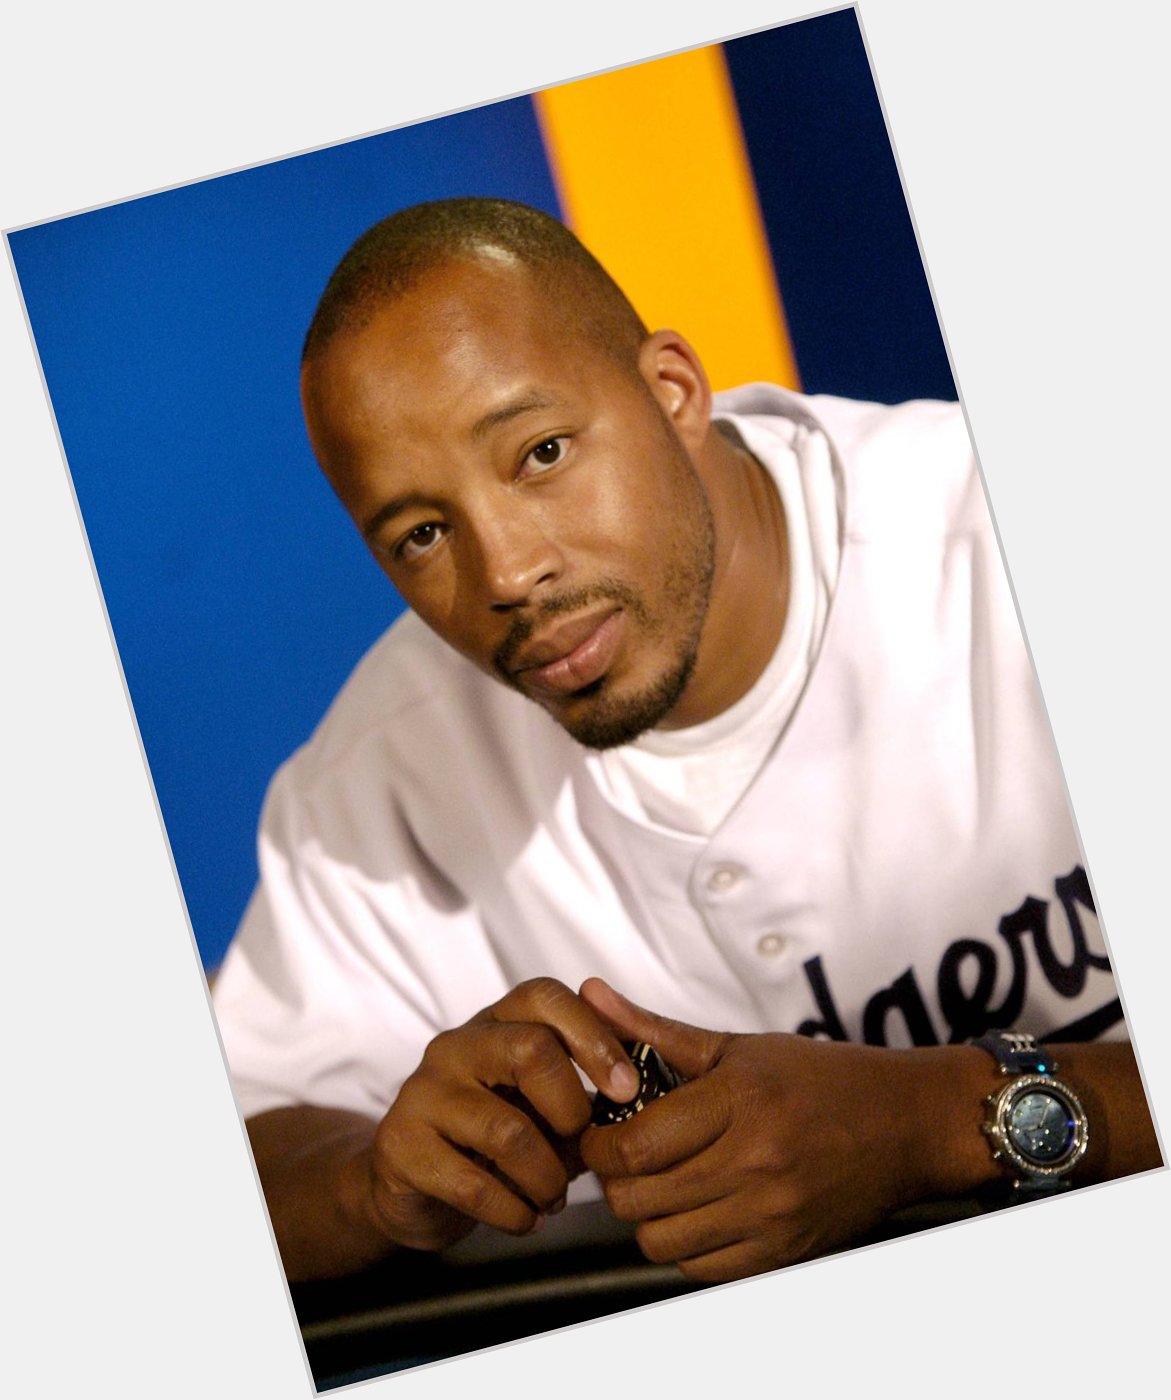 Happy 51st Birthday, Warren G!

What song introduced you to him? 